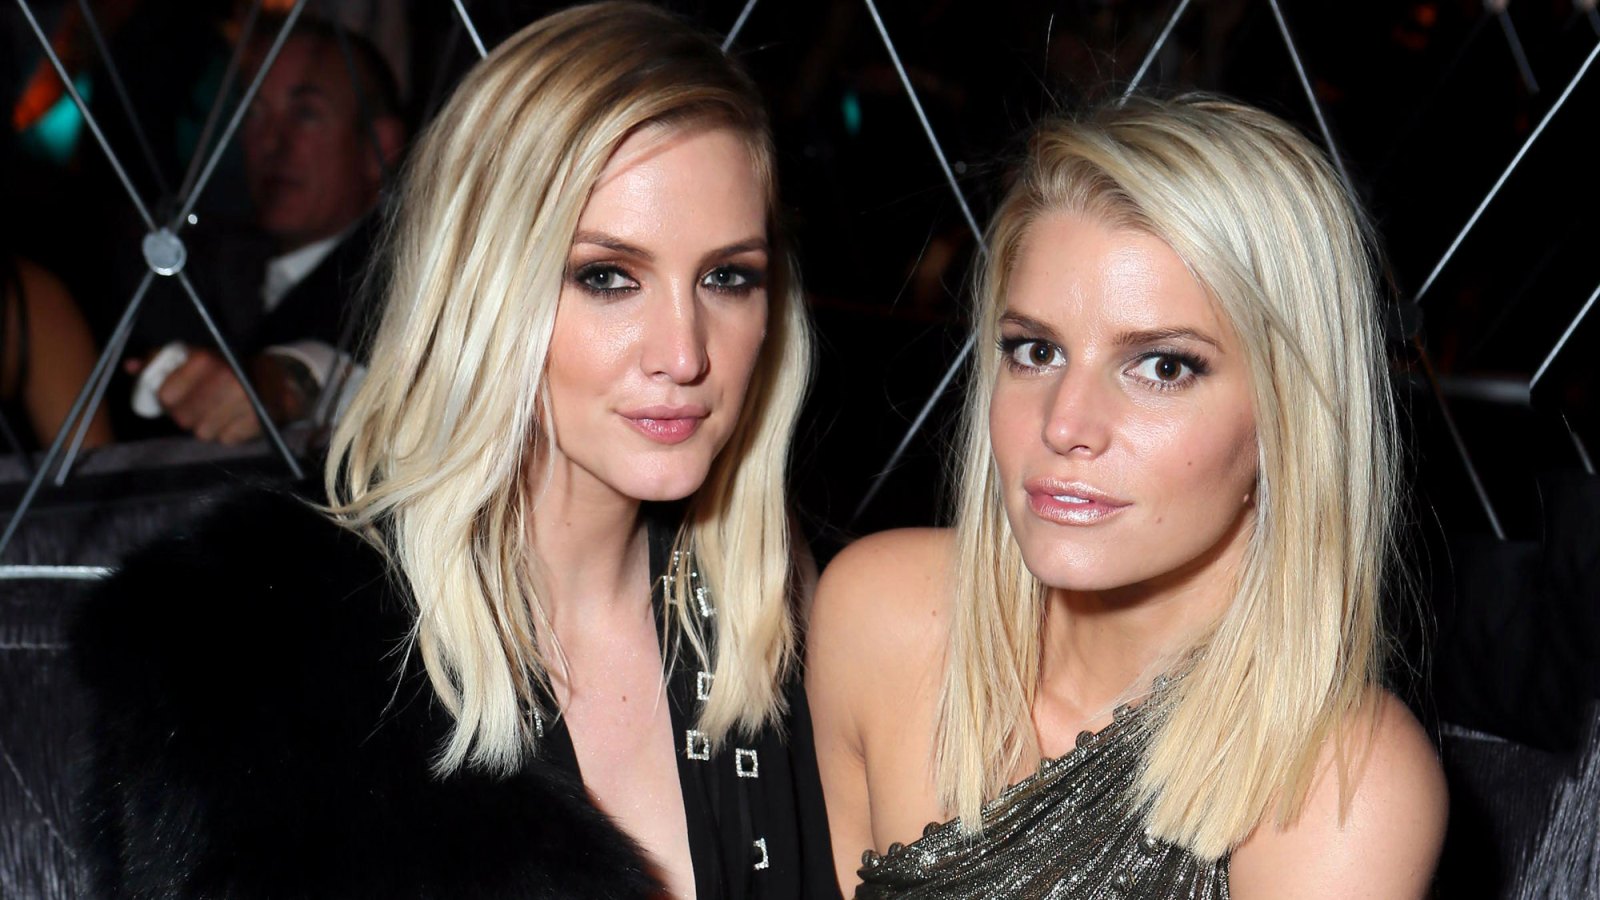 Jessica Simpson 'Wanted to Protect' Sister Ashlee Simpson From Abuse: 'I Would Rather the Pain Happen to Me'